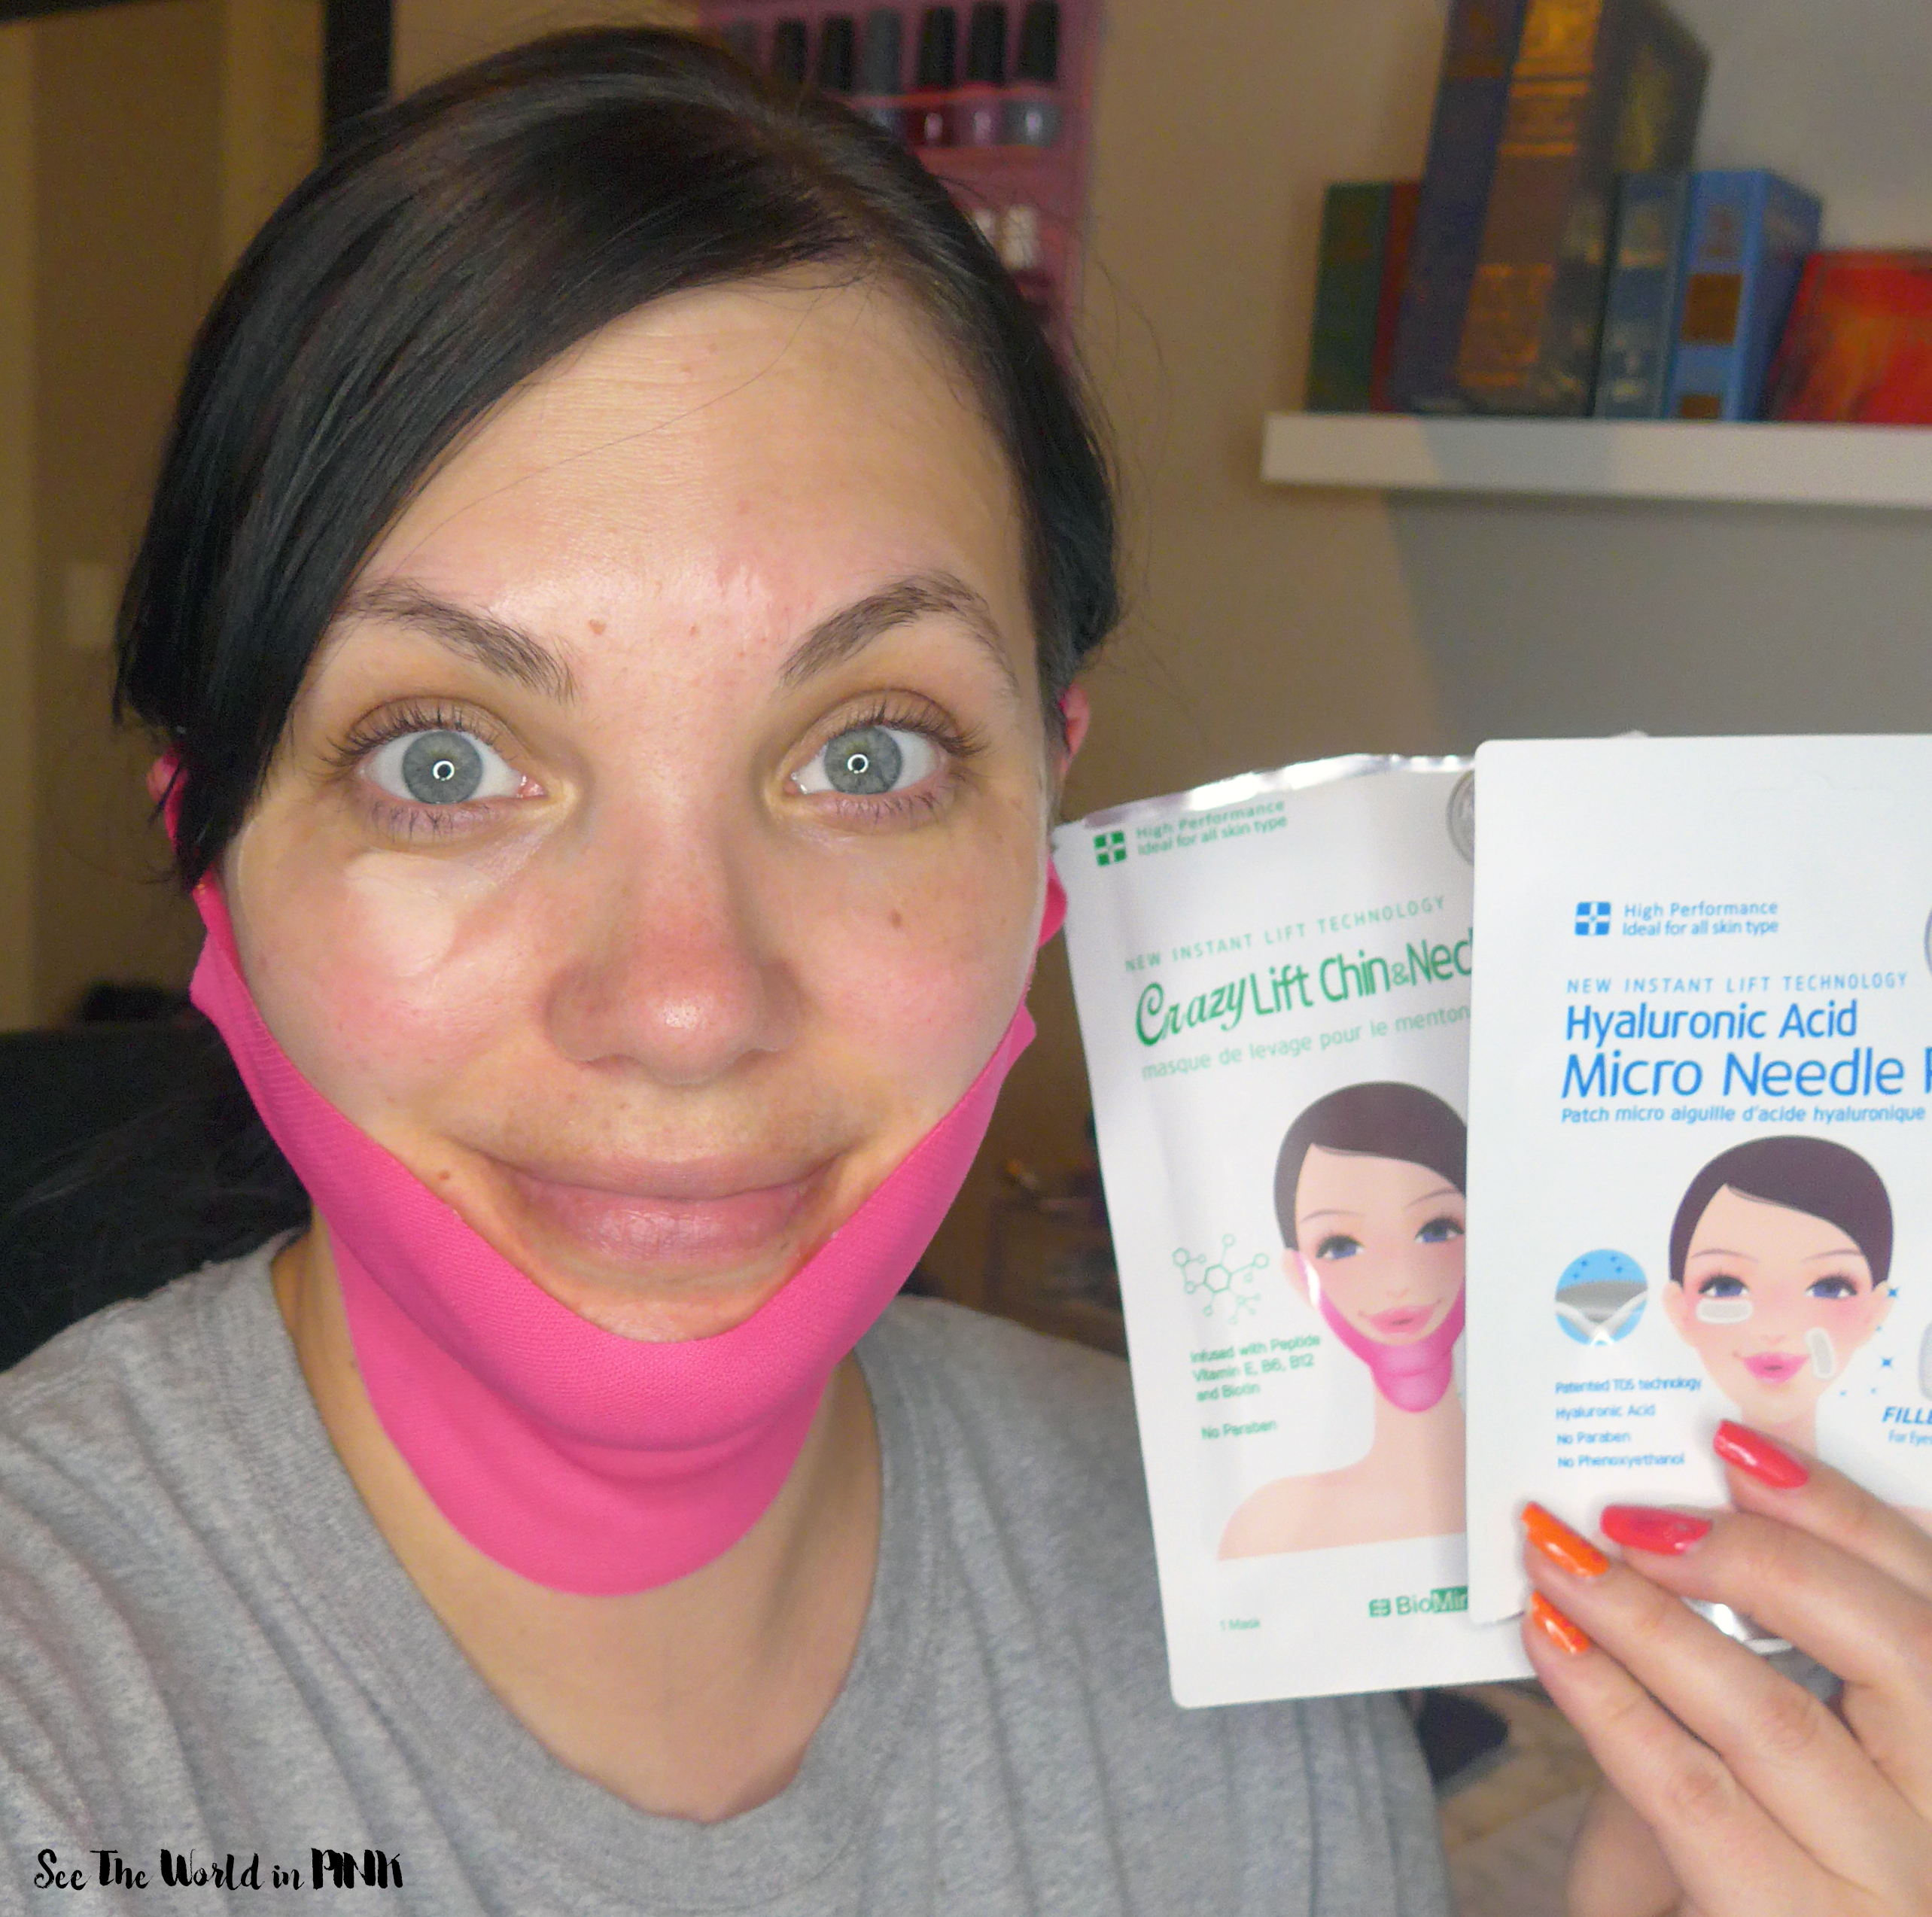 Skincare Saturday - BioMiracle Hyaluronic Acid Micro Needle Patch and Crazy Lift Chin & Neck Mask